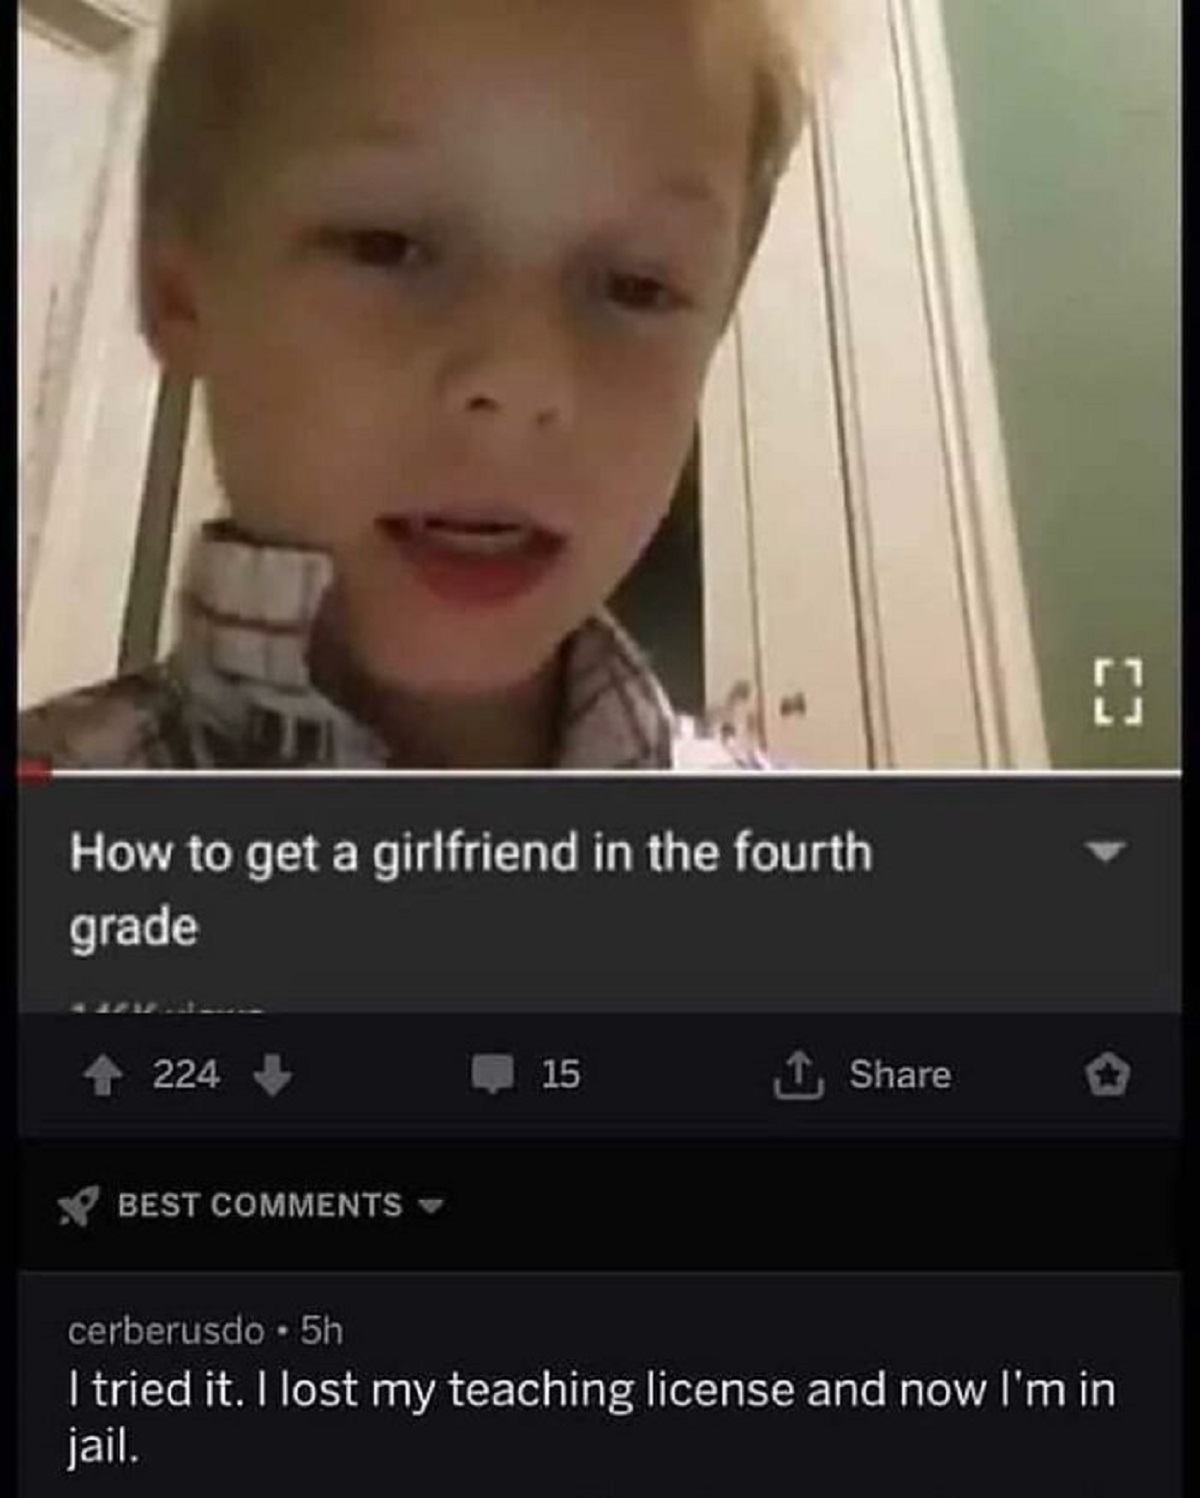 photo caption - How to get a girlfriend in the fourth grade 224 Best 15 1 {}} cerberusdo. 5h I tried it. I lost my teaching license and now I'm in jail.